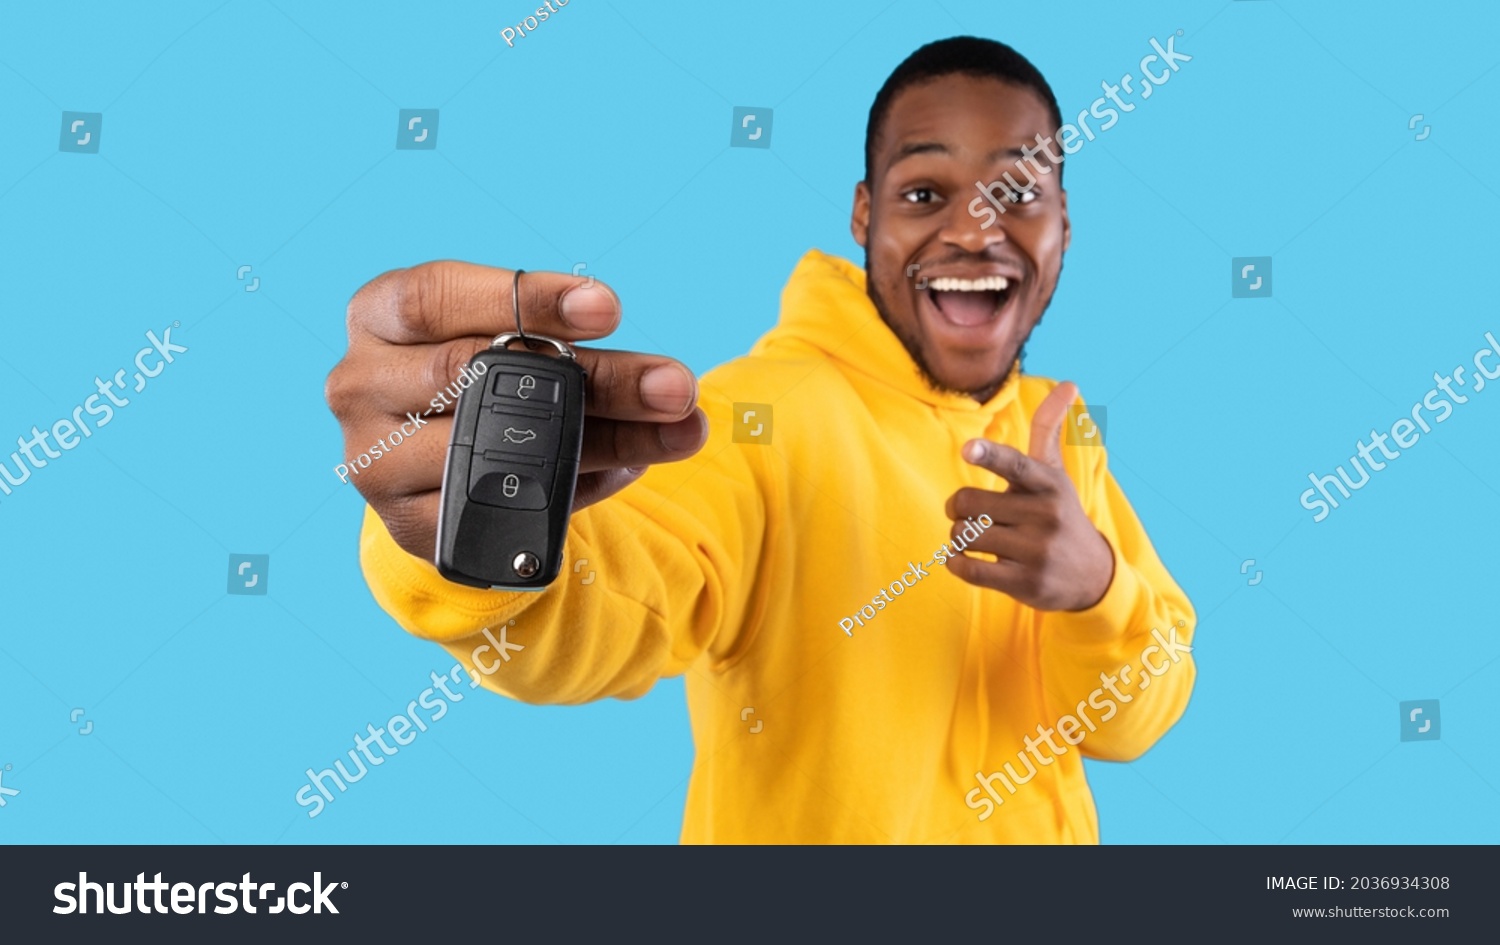 New Car. Excited Black Man Showing Key In Excitement Celebrating Buying New Auto Posing Standing On Blue Studio Background. Dreams Come True, Own Automobile Concept. Panorama, Selective Focus #2036934308